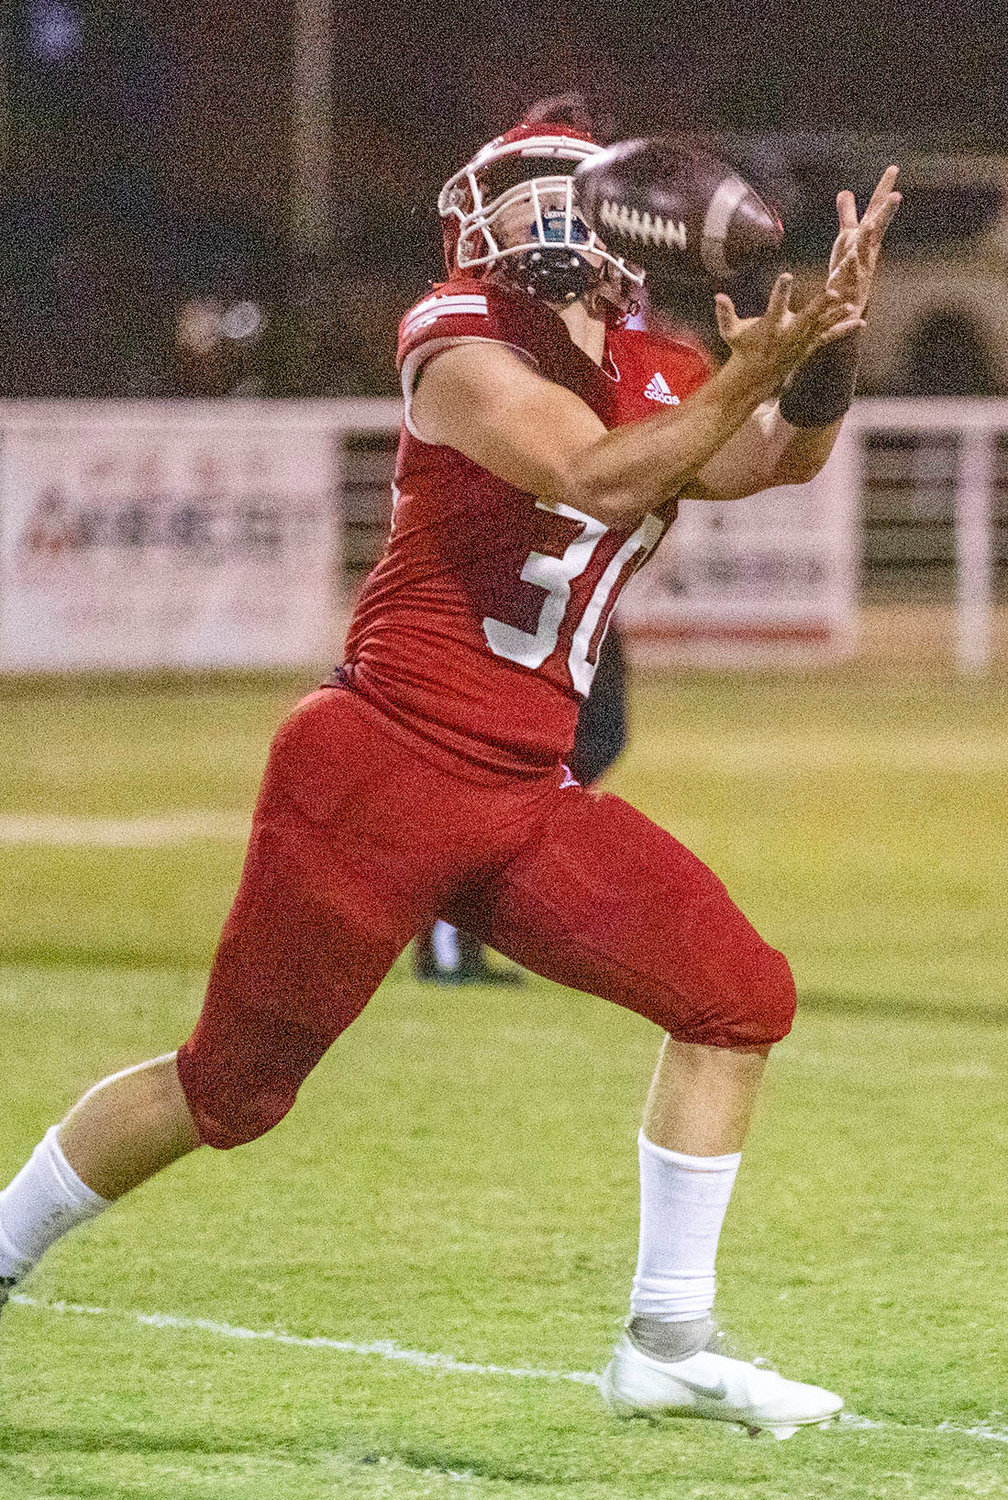 Washington sophomore Kade Norman hauls in a touchdown pass Friday night during the Warriors’ 69-0 win over Holdenville.